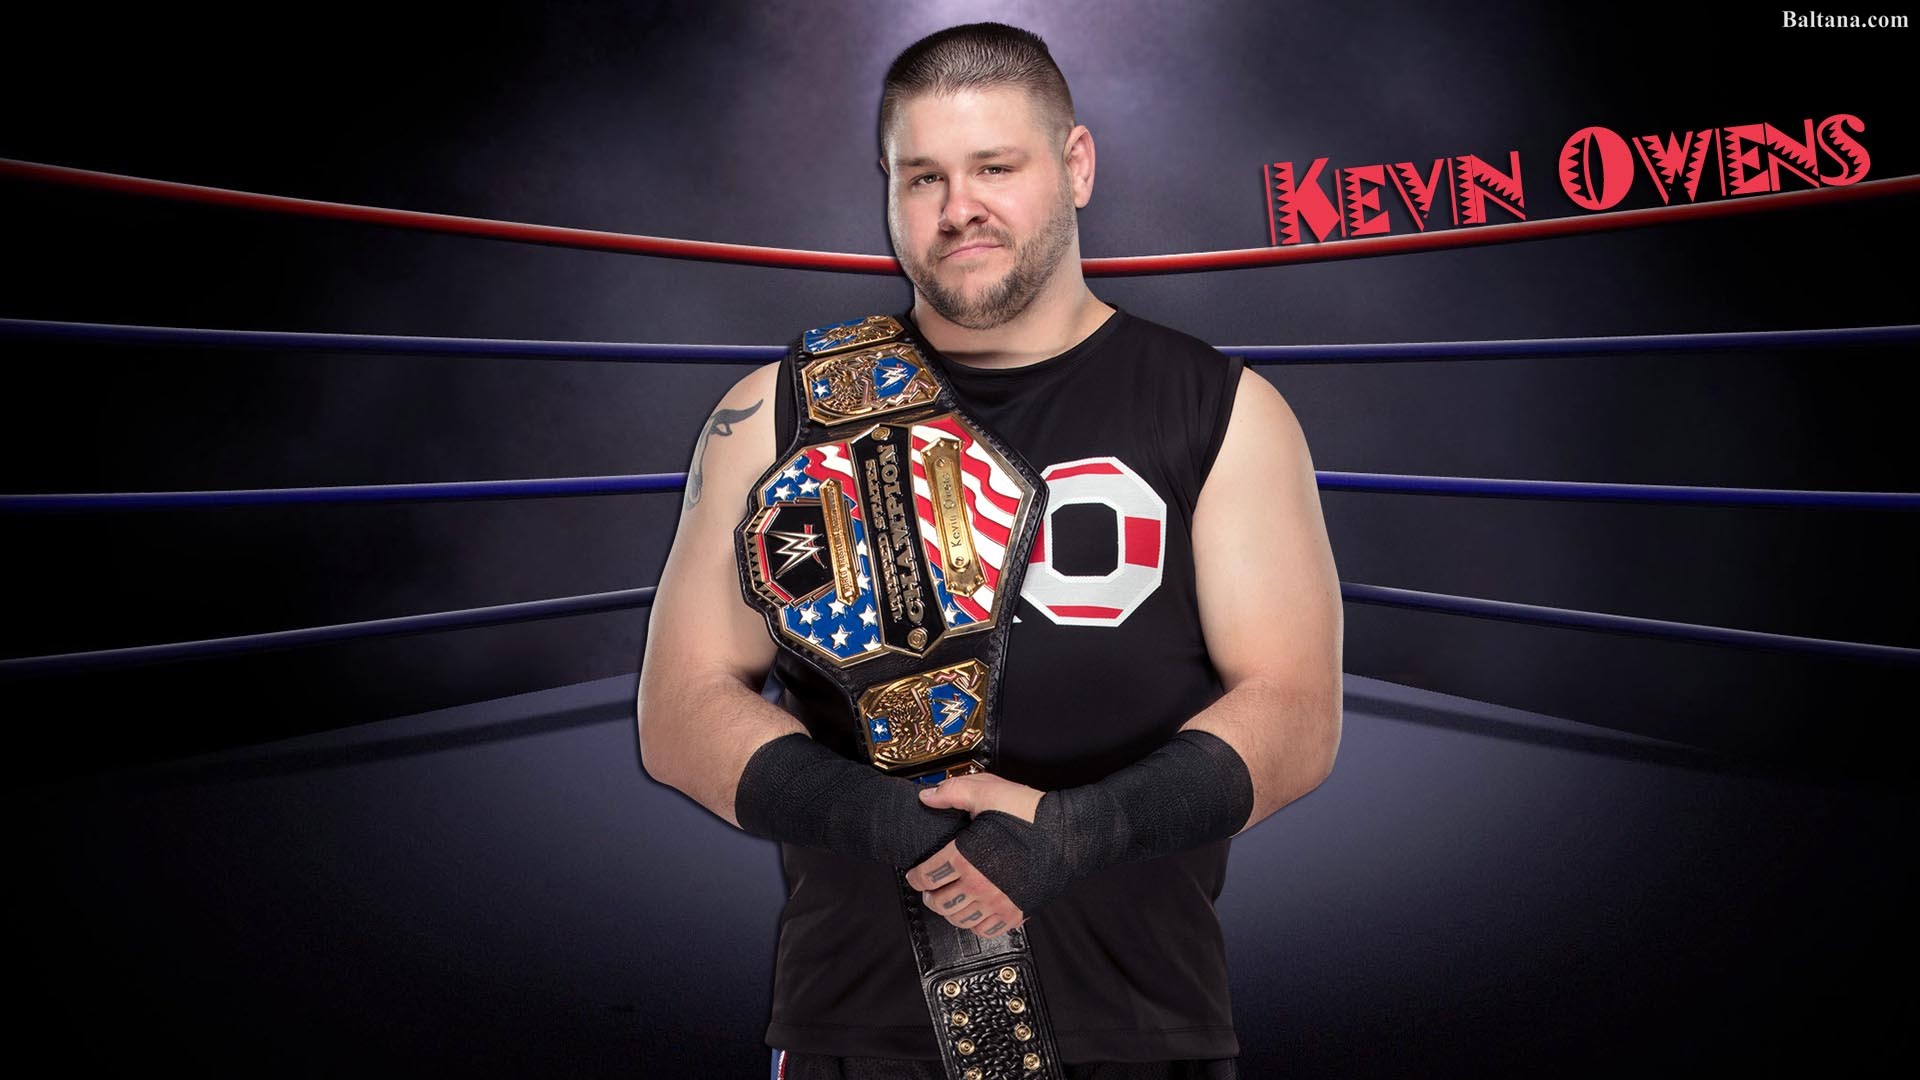 Kevin Owens High Definition Wallpaper 